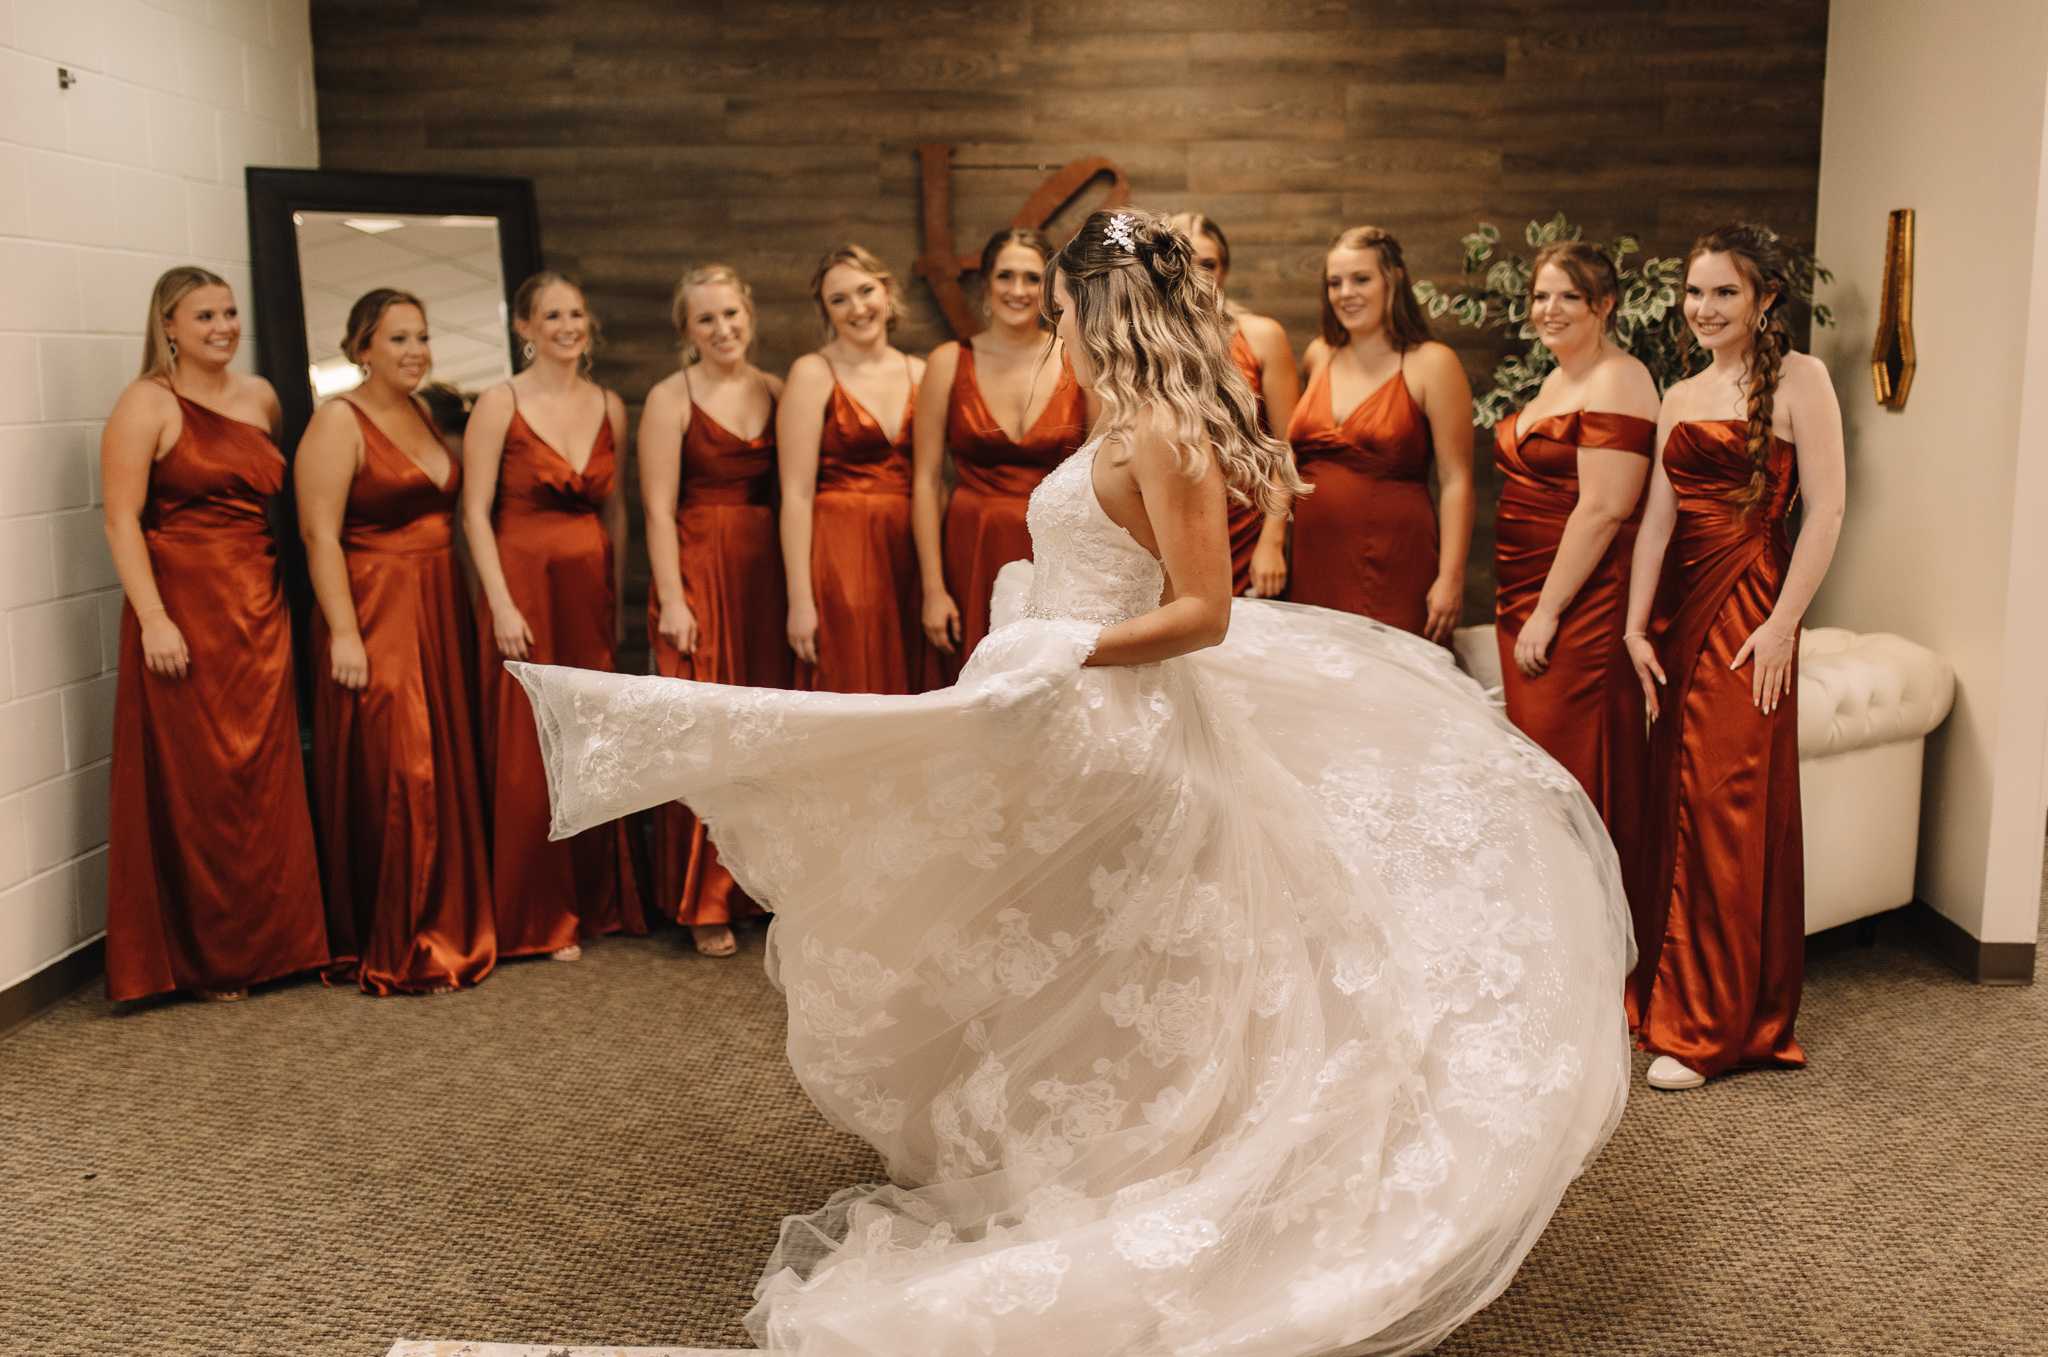 Bride twirling around in her dress as her bridesmaids are admiring what she looks like